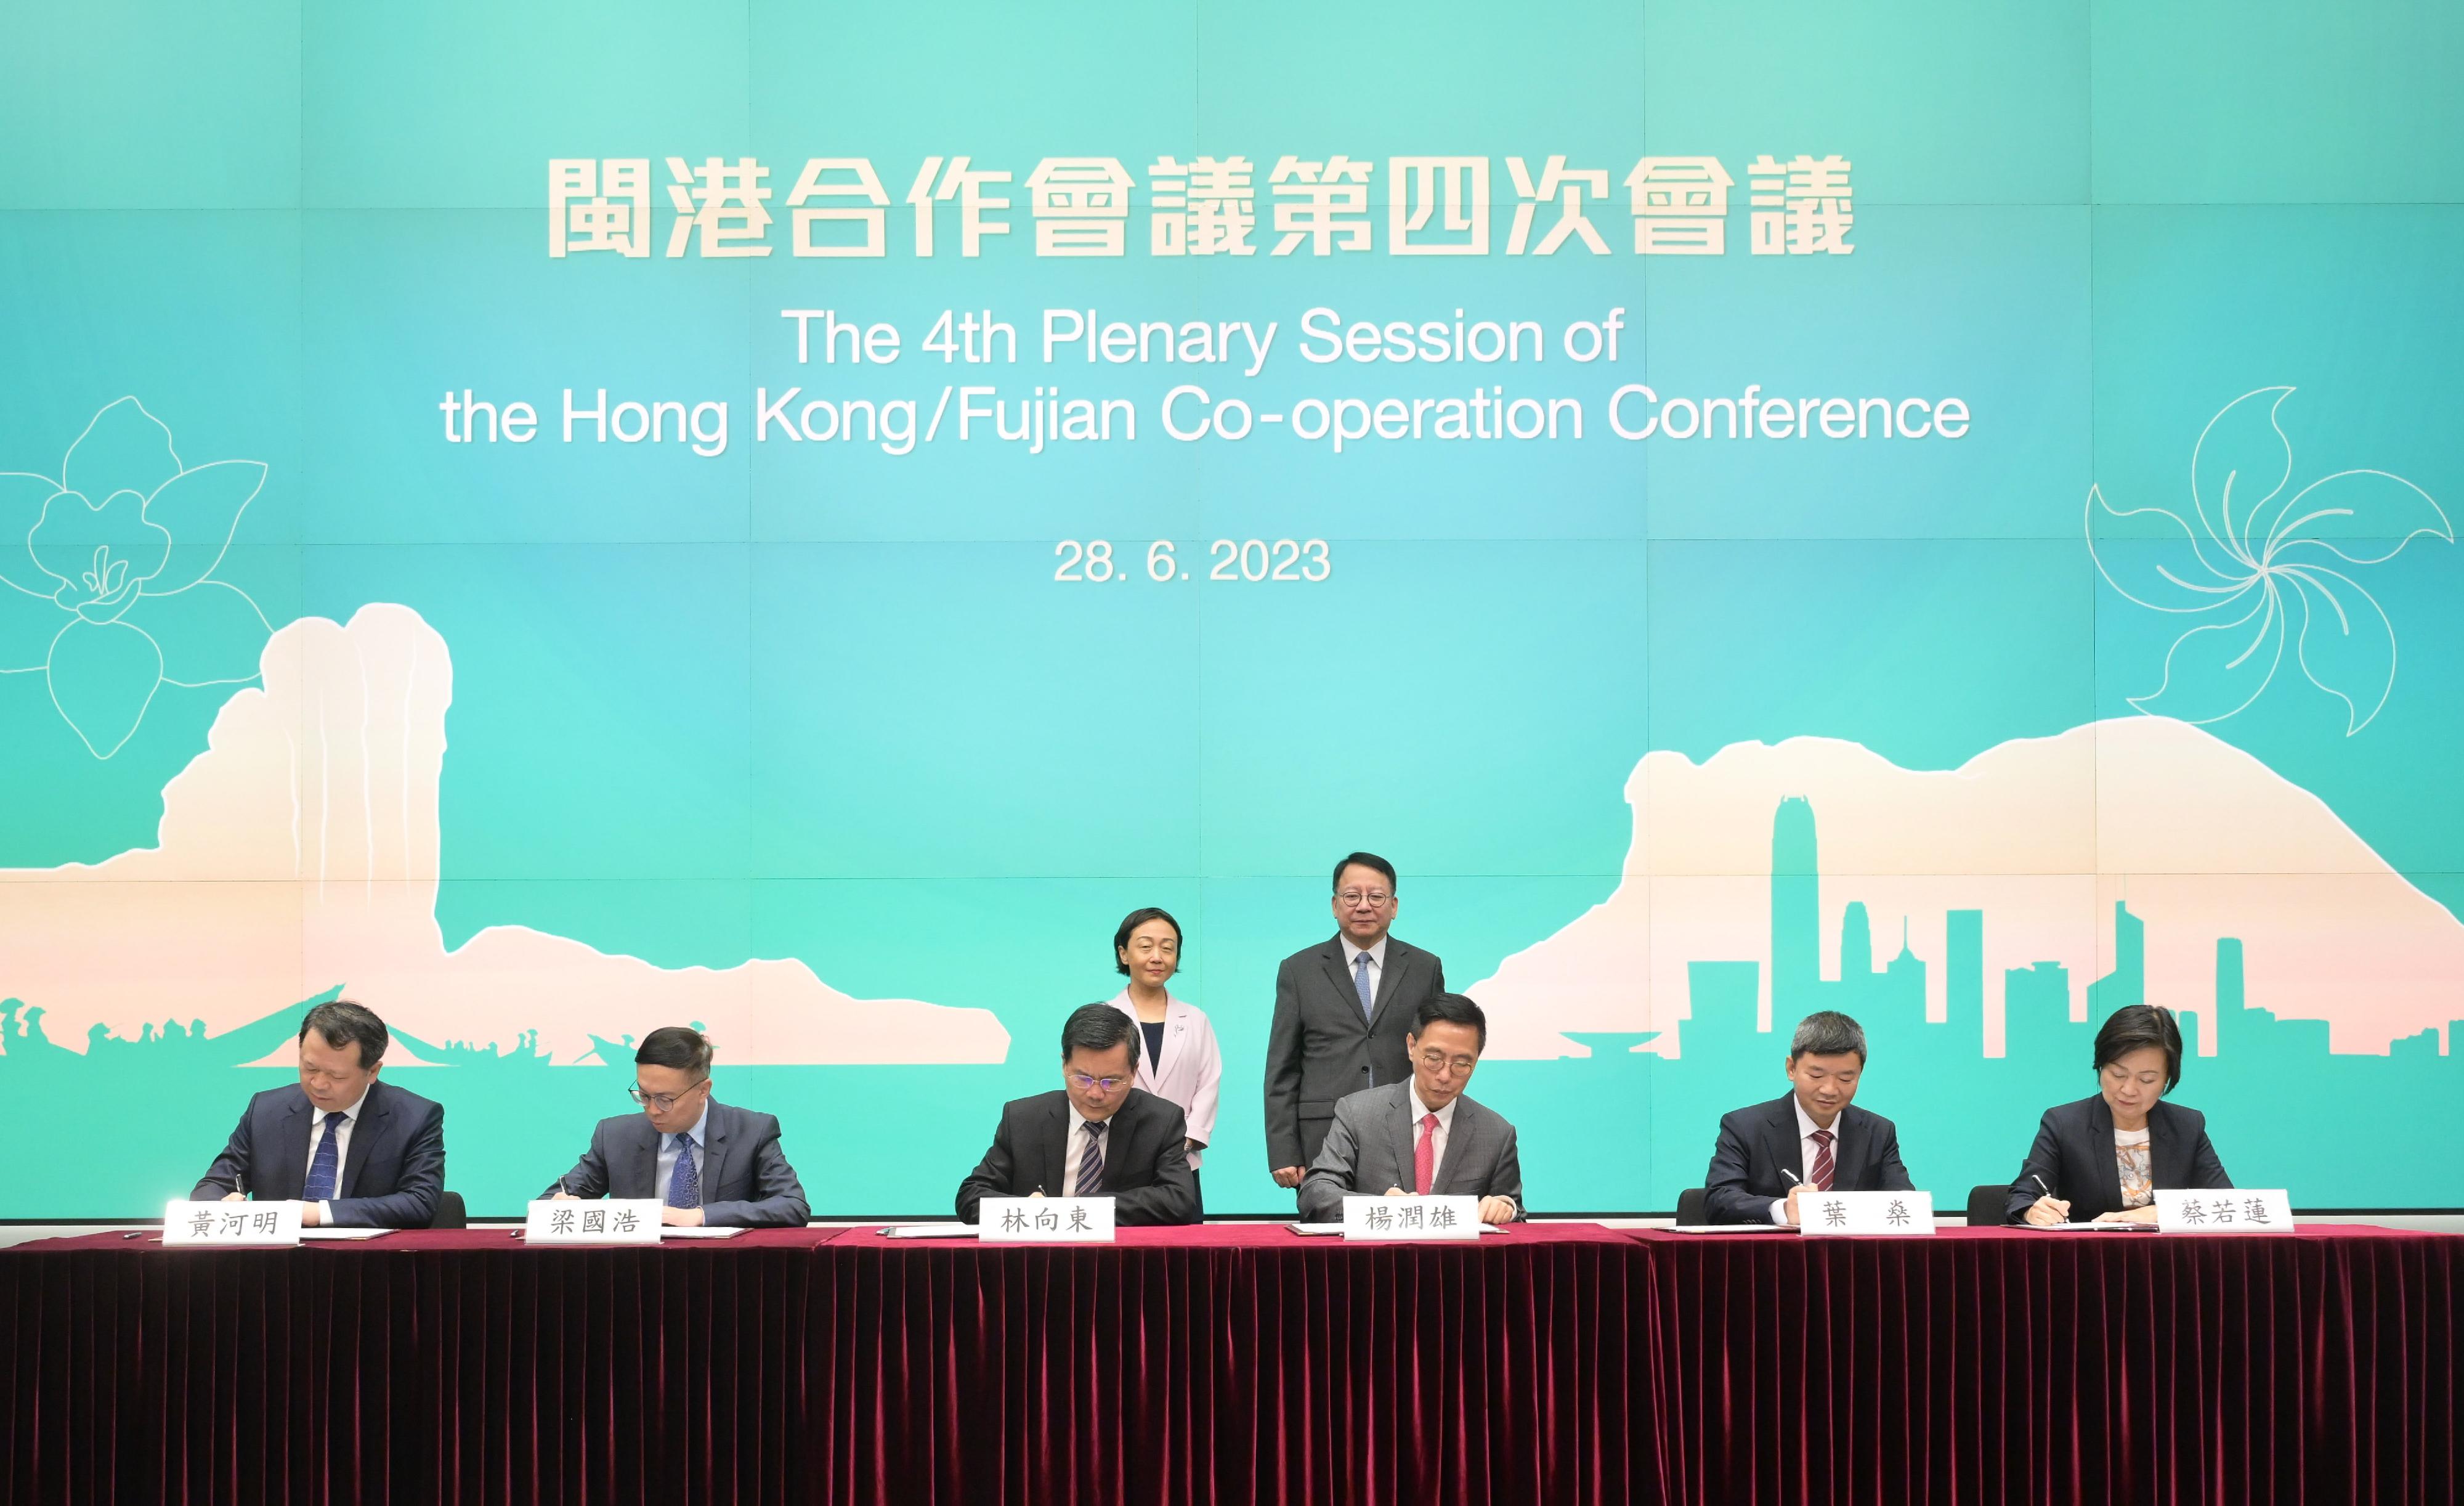 The Chief Secretary for Administration, Mr Chan Kwok-ki, and the Executive Vice Governor of Fujian Province, Ms Guo Ningning, co-chaired the Fourth Plenary Session of the Hong Kong/Fujian Co-operation Conference today (June 28) in Hong Kong. Photo shows the signing of three co-operation agreements by government departments and statutory bodies of the two places as witnessed by Mr Chan (back row, right) and Ms Guo (back row, left).
